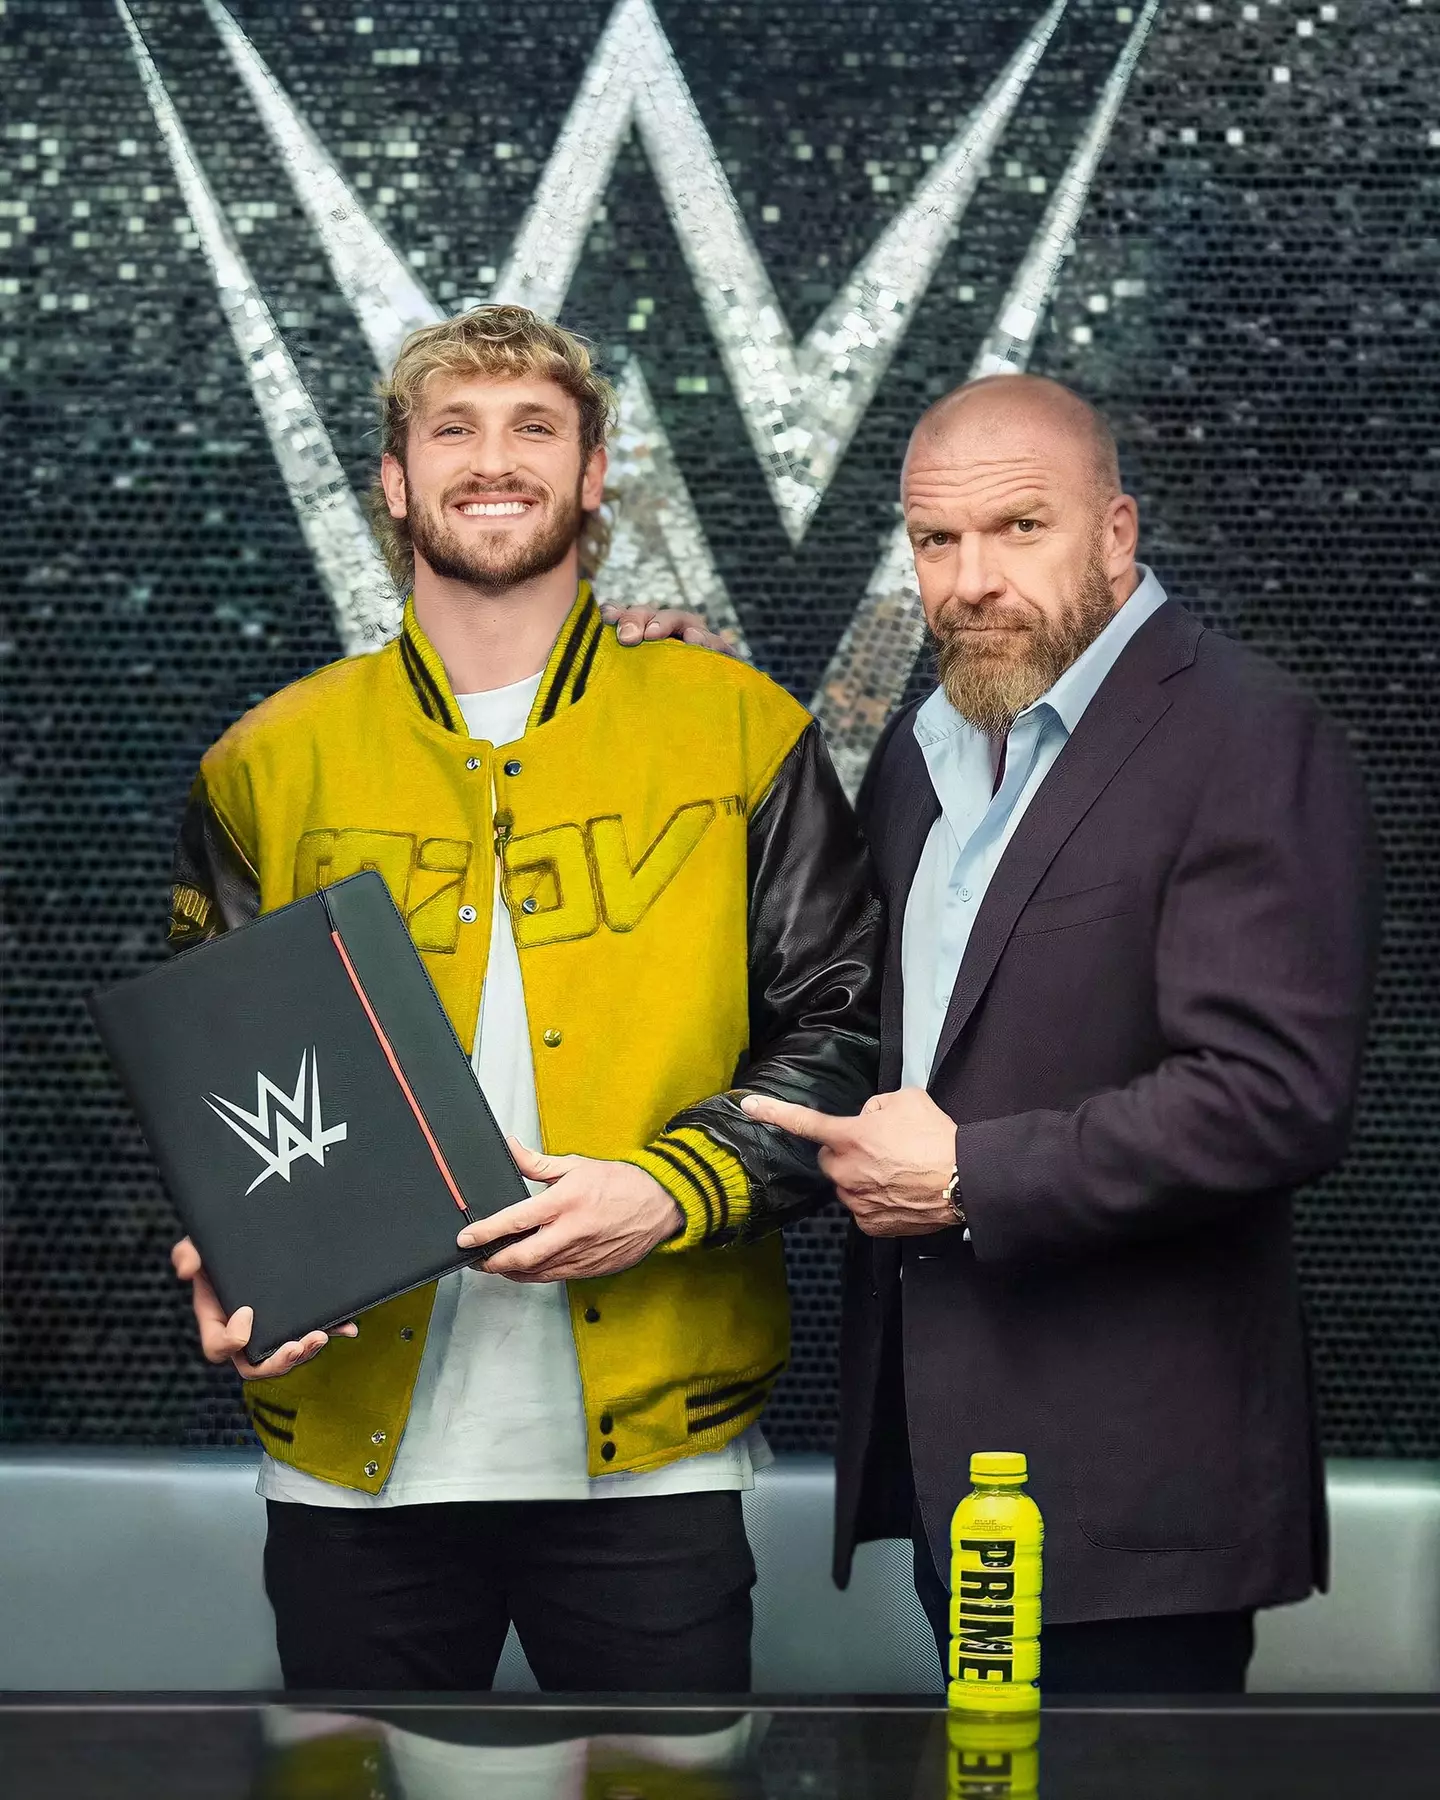 Paul has signed a new WWE contract.